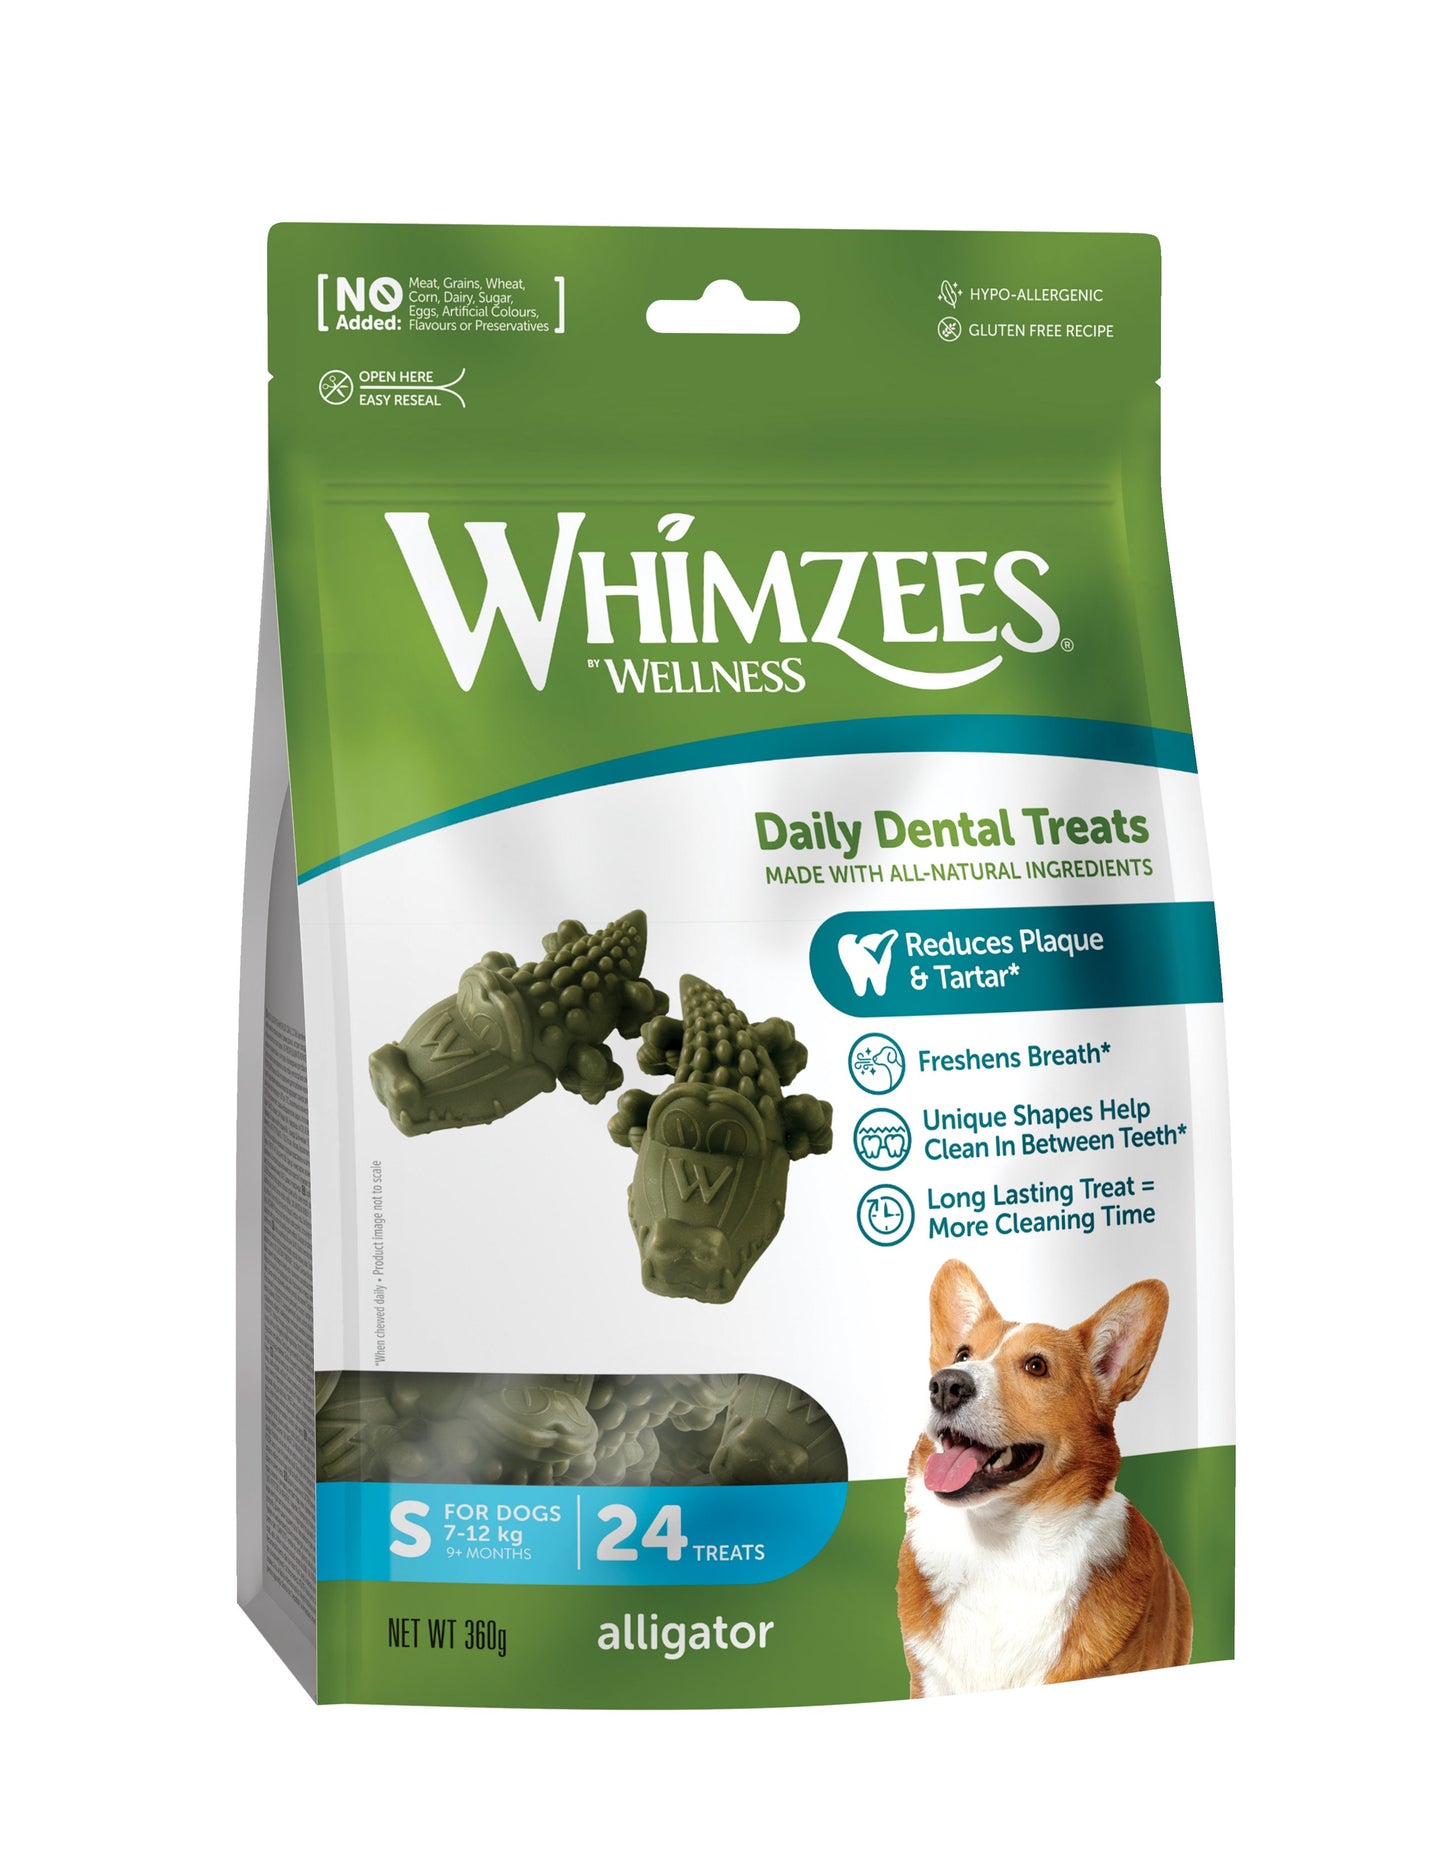 Whimzees Wellness Daily Dental Treat Alligator Small Bag